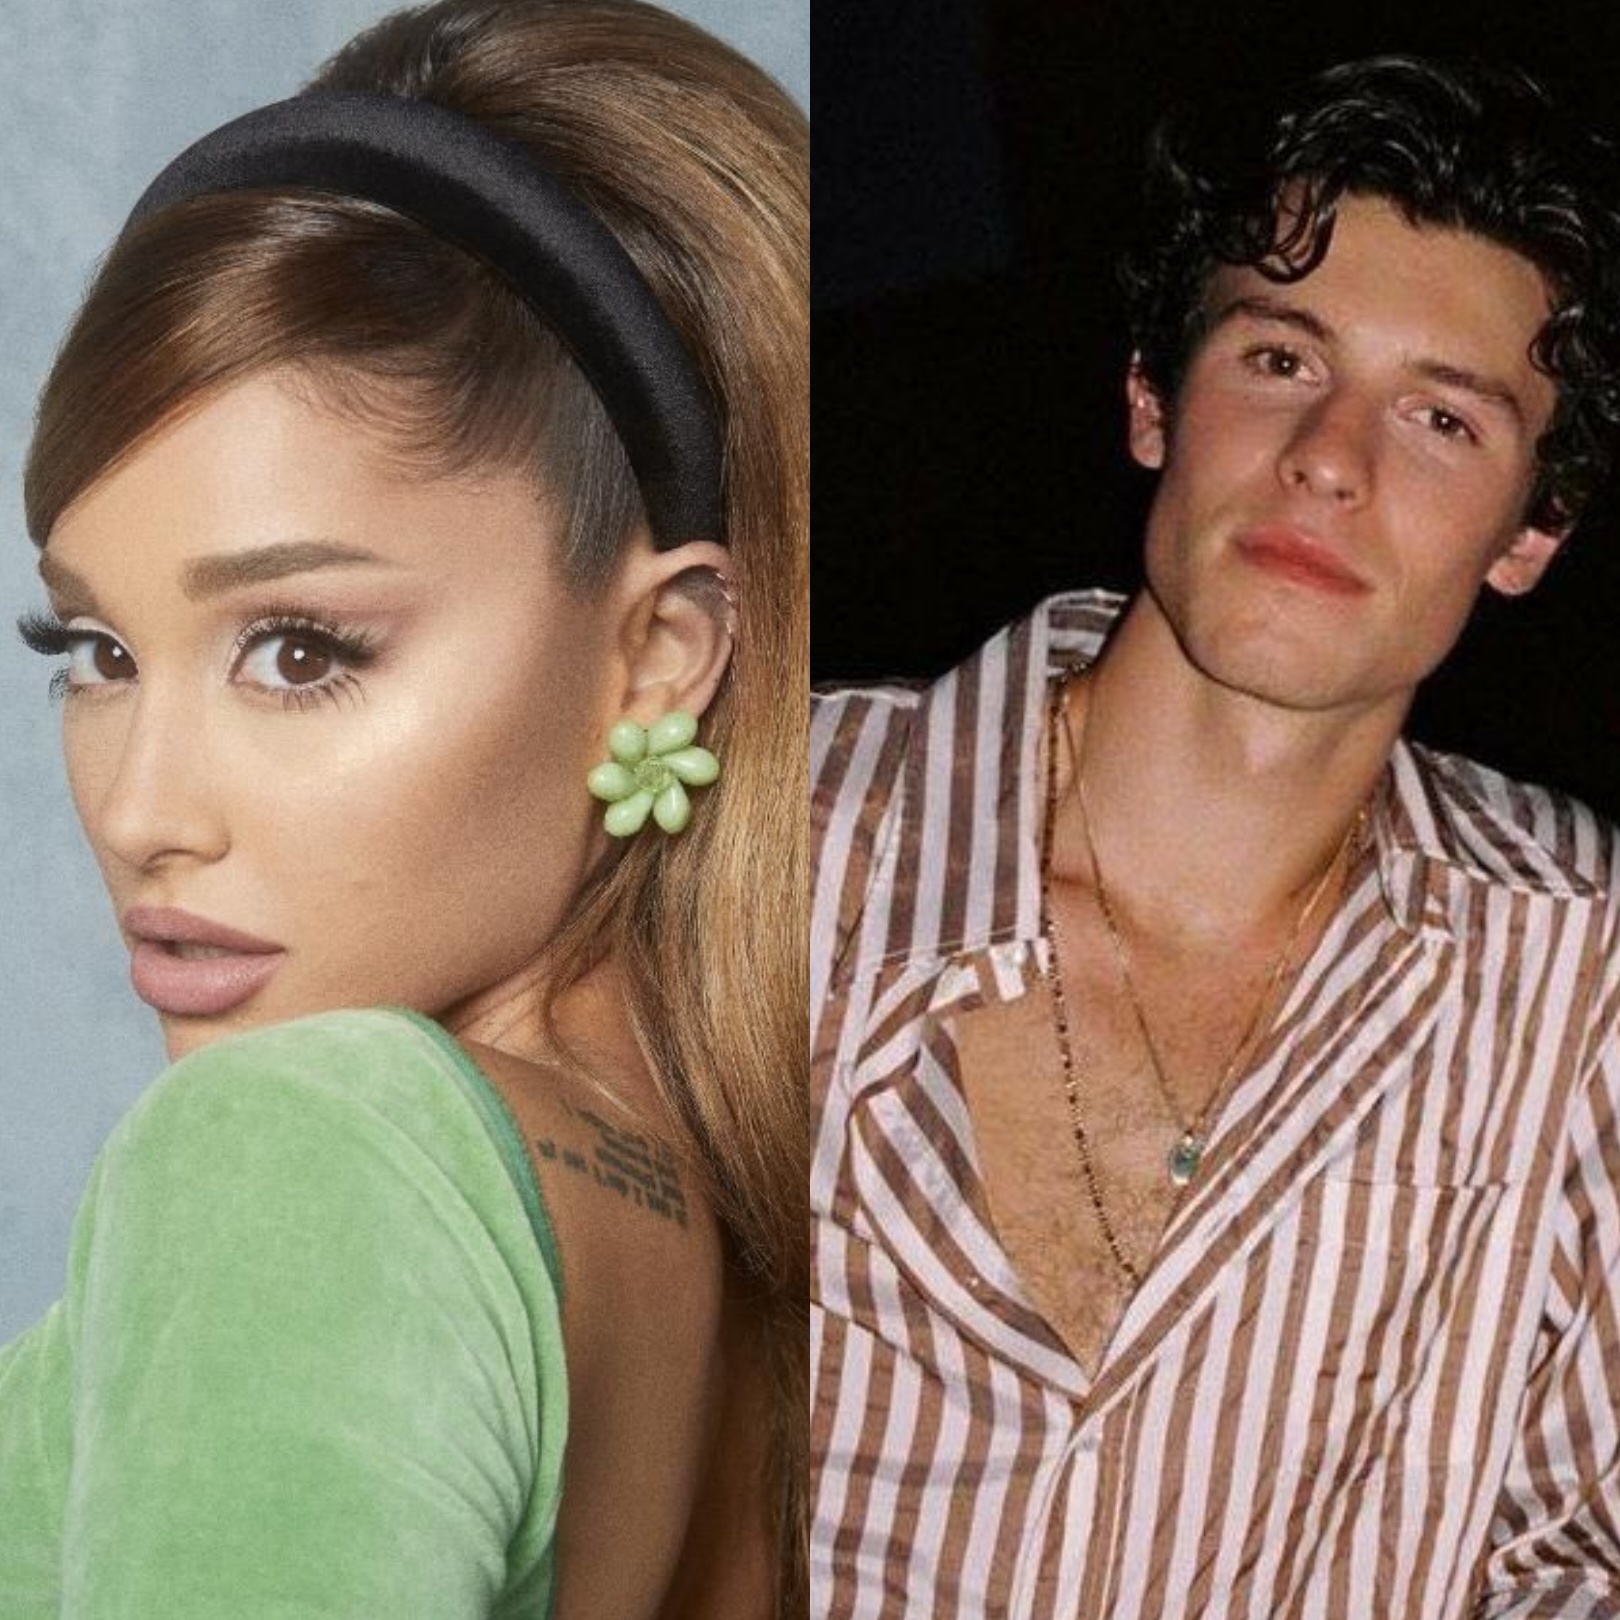 Ariana Grande and Shawn Mendes